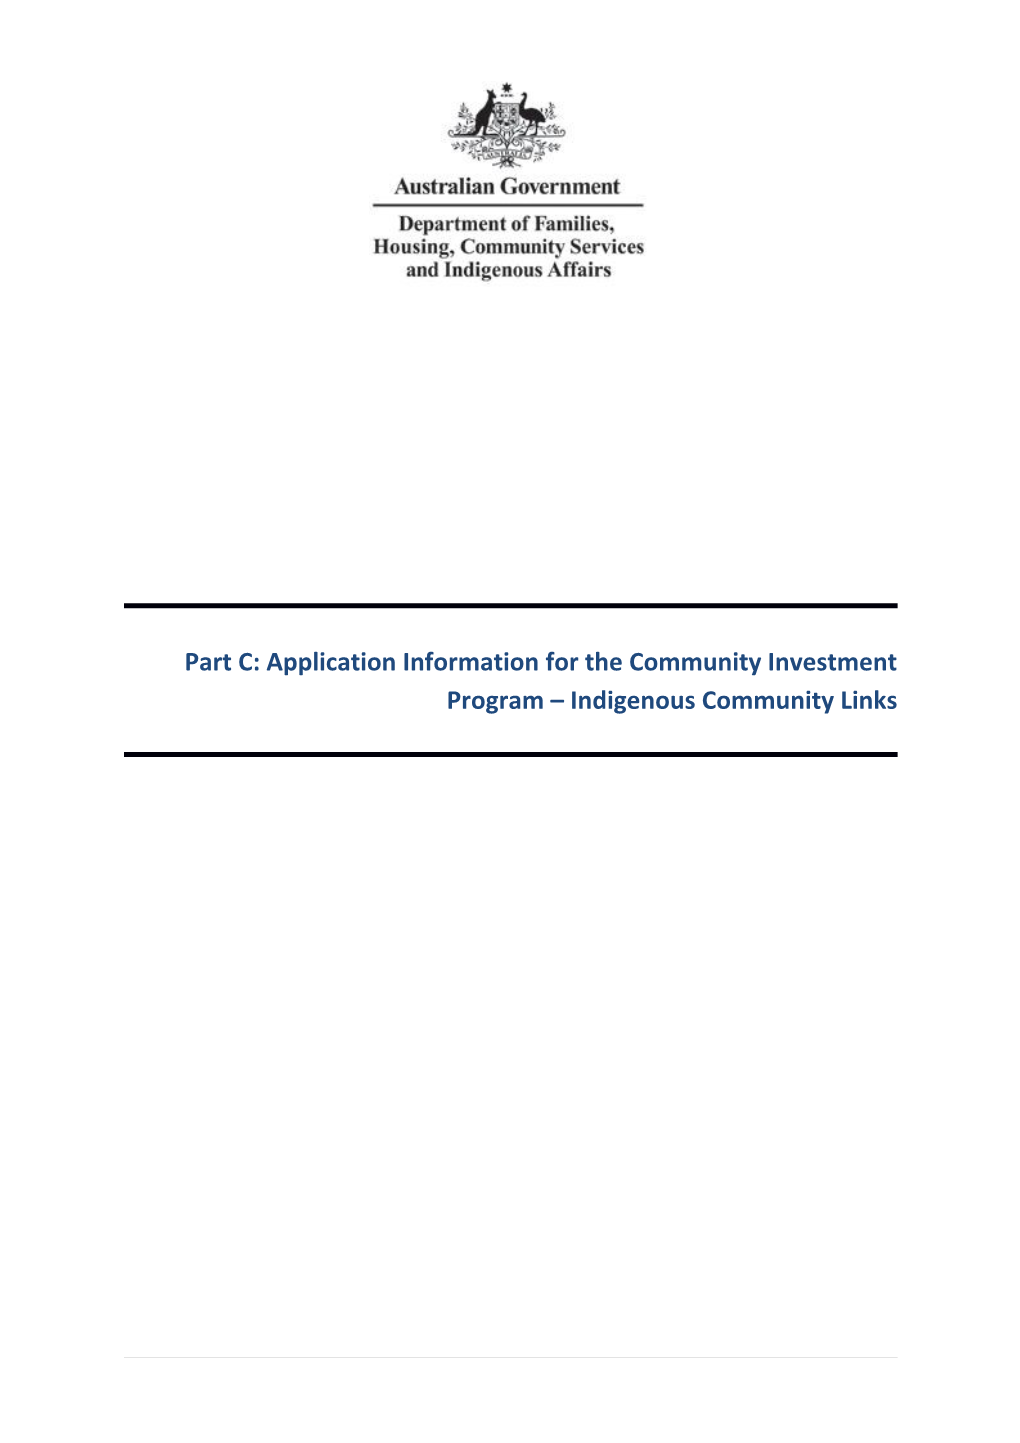 Part C: Application Information for the Community Investment Program Indigenous Community